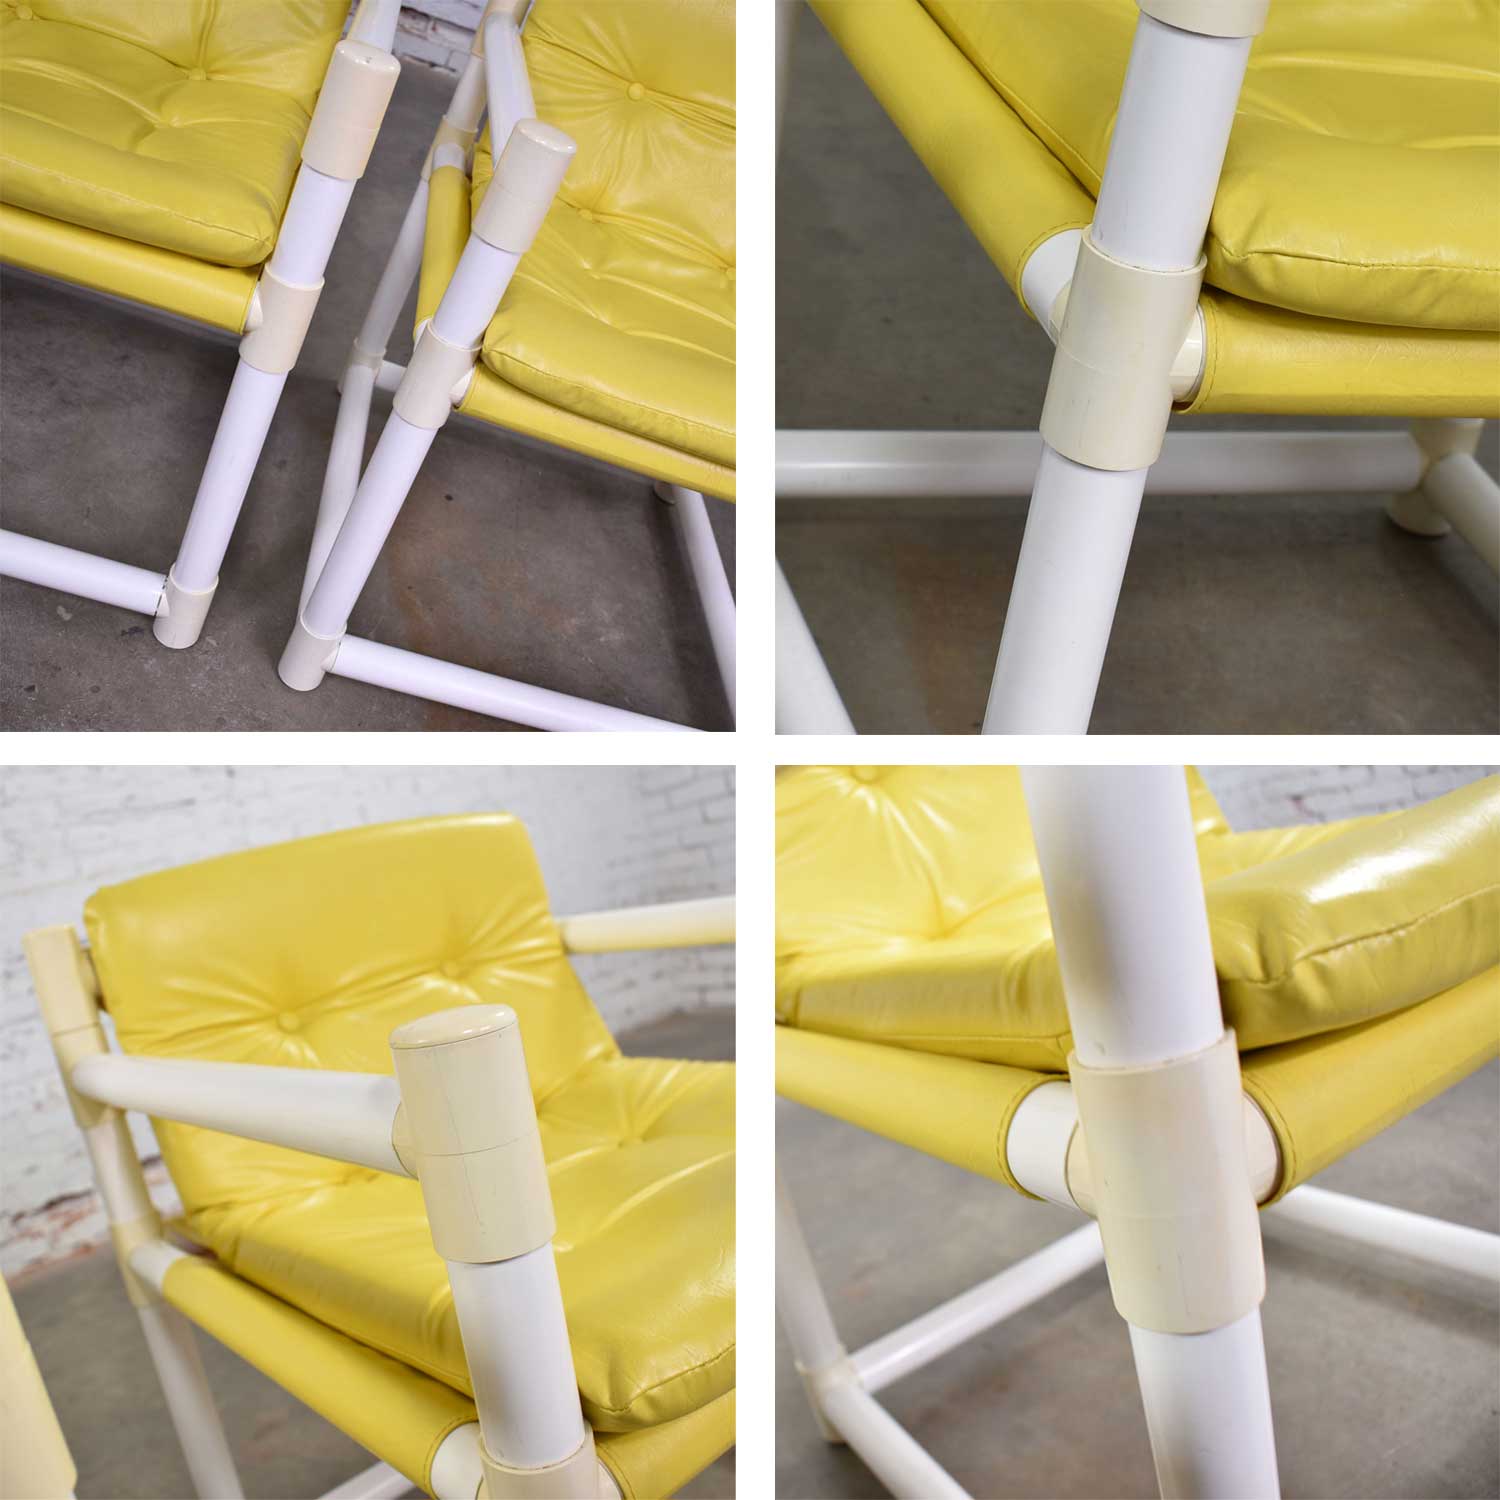 Pair MCM Outdoor PVC Side Chairs Yellow Vinyl Upholstery by Decorion Fun Furnishings